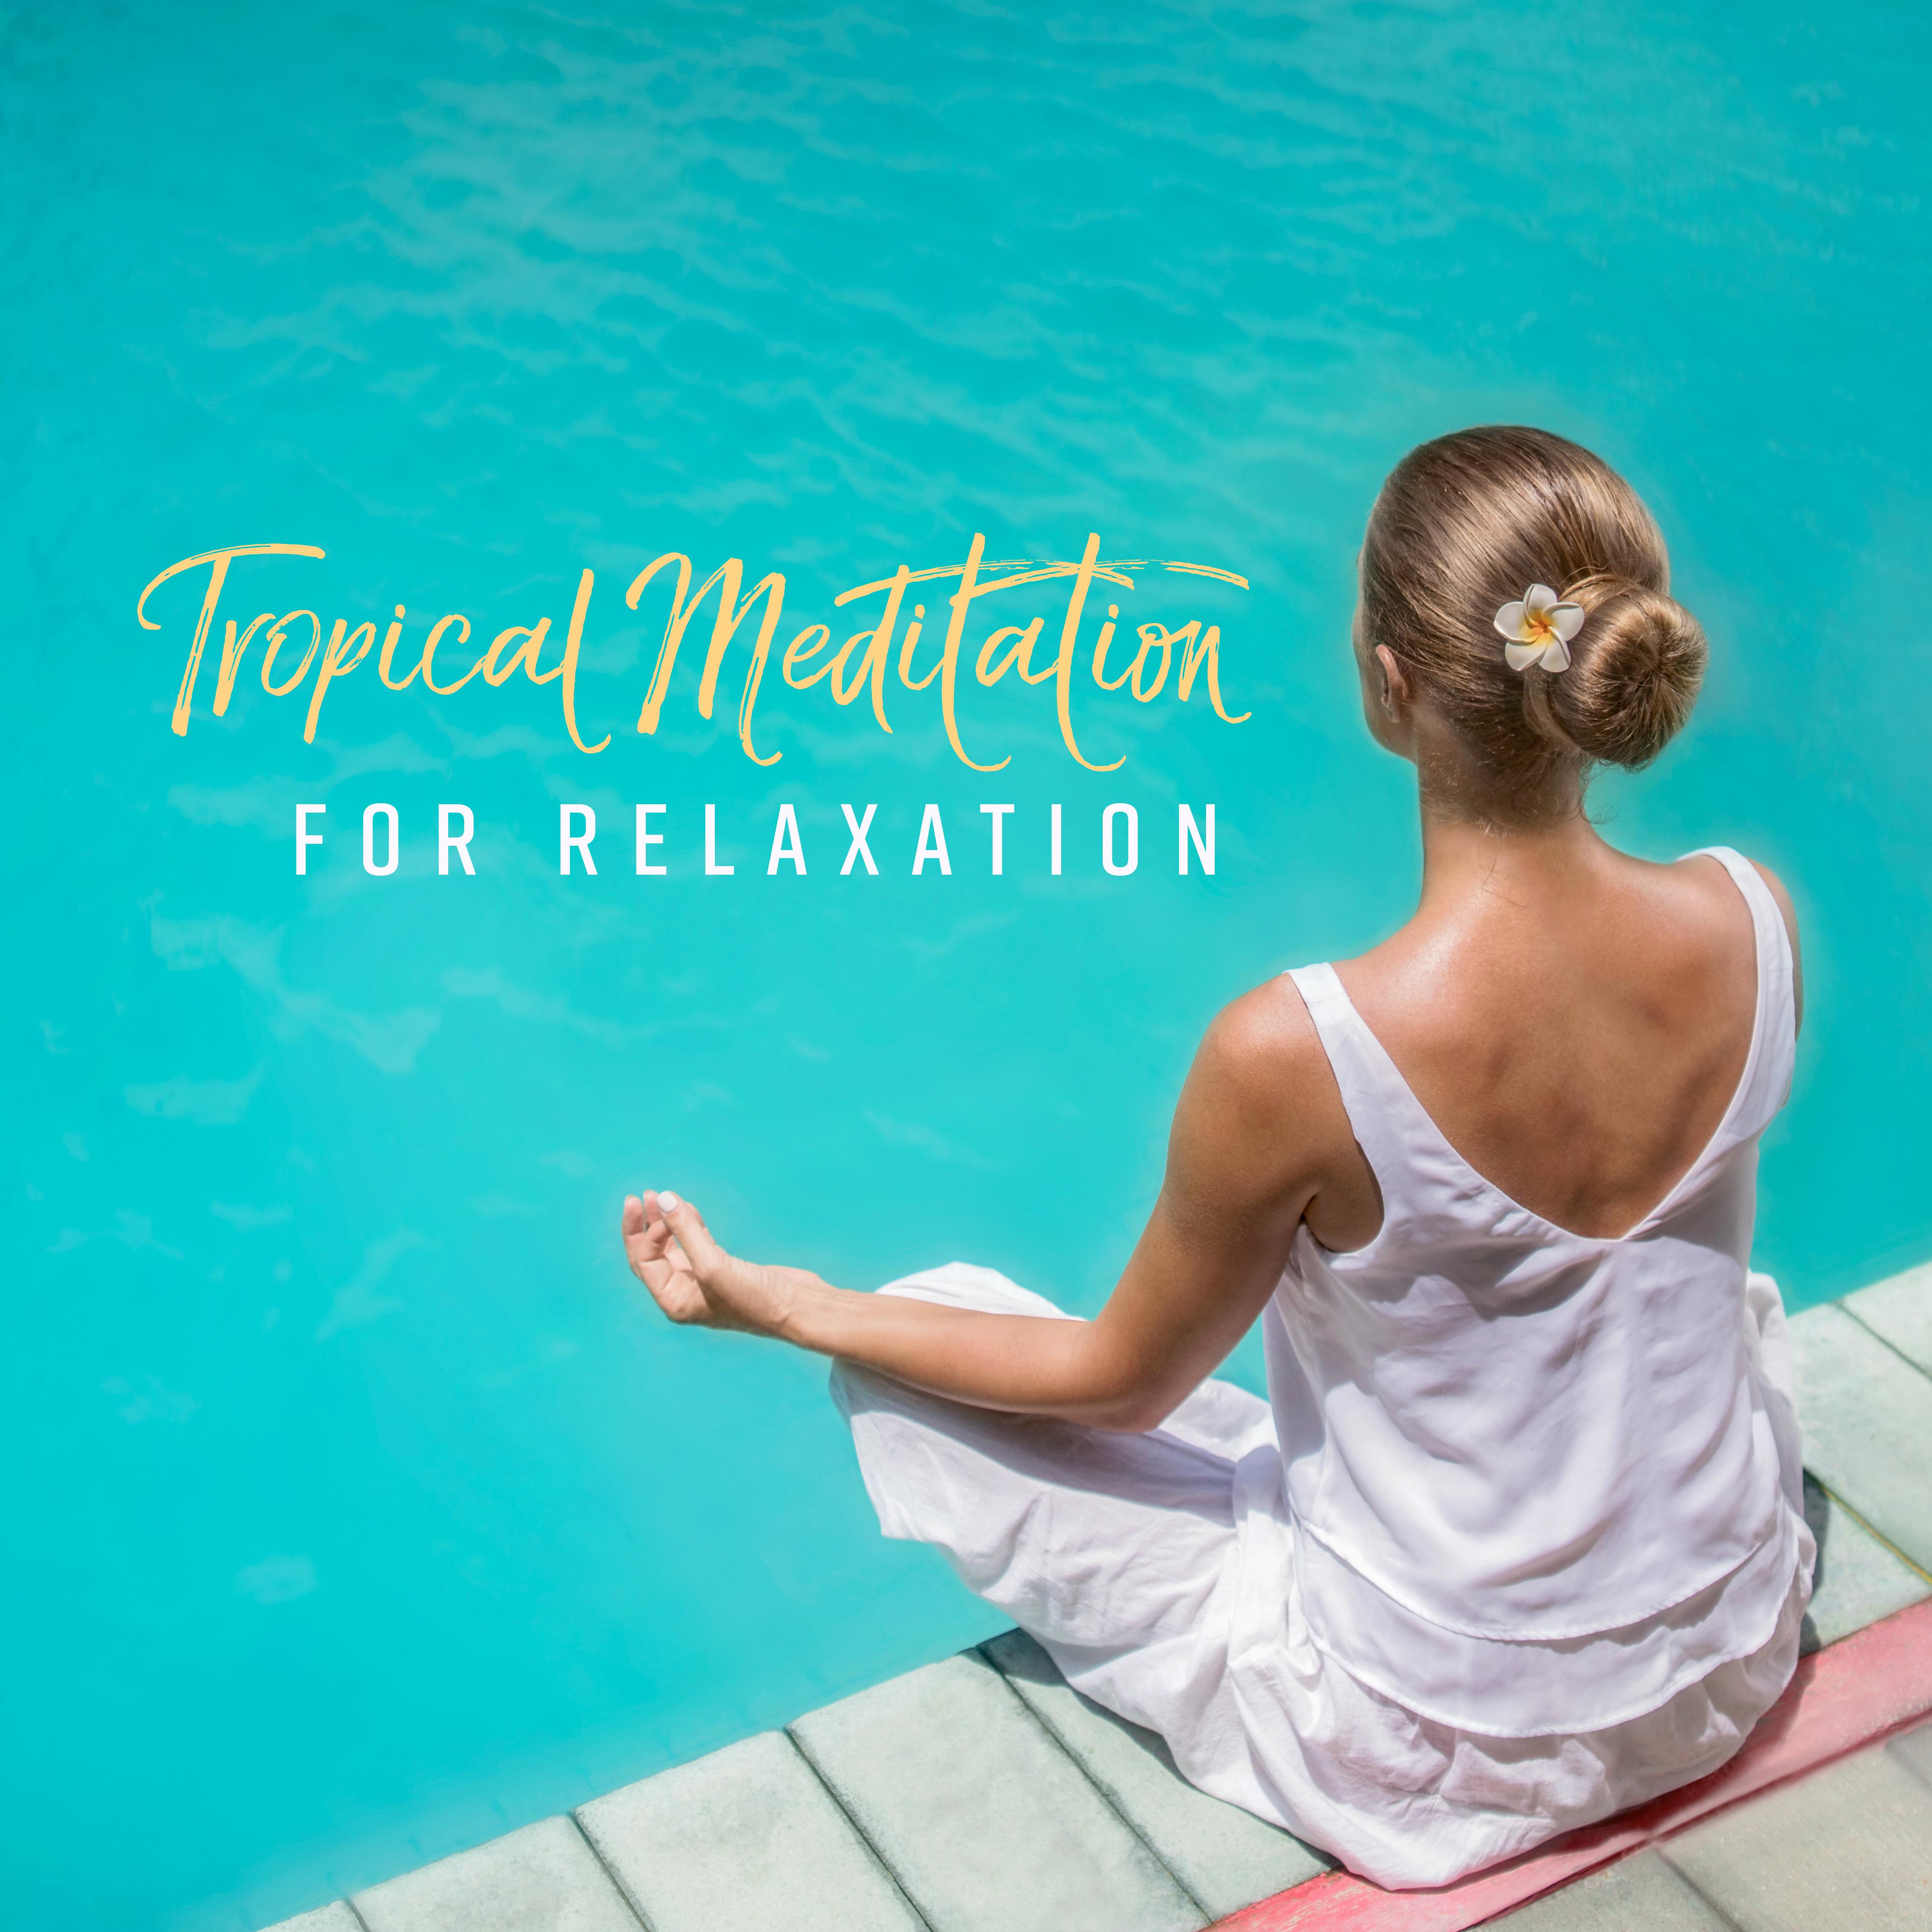 Tropical Meditation for Relaxation